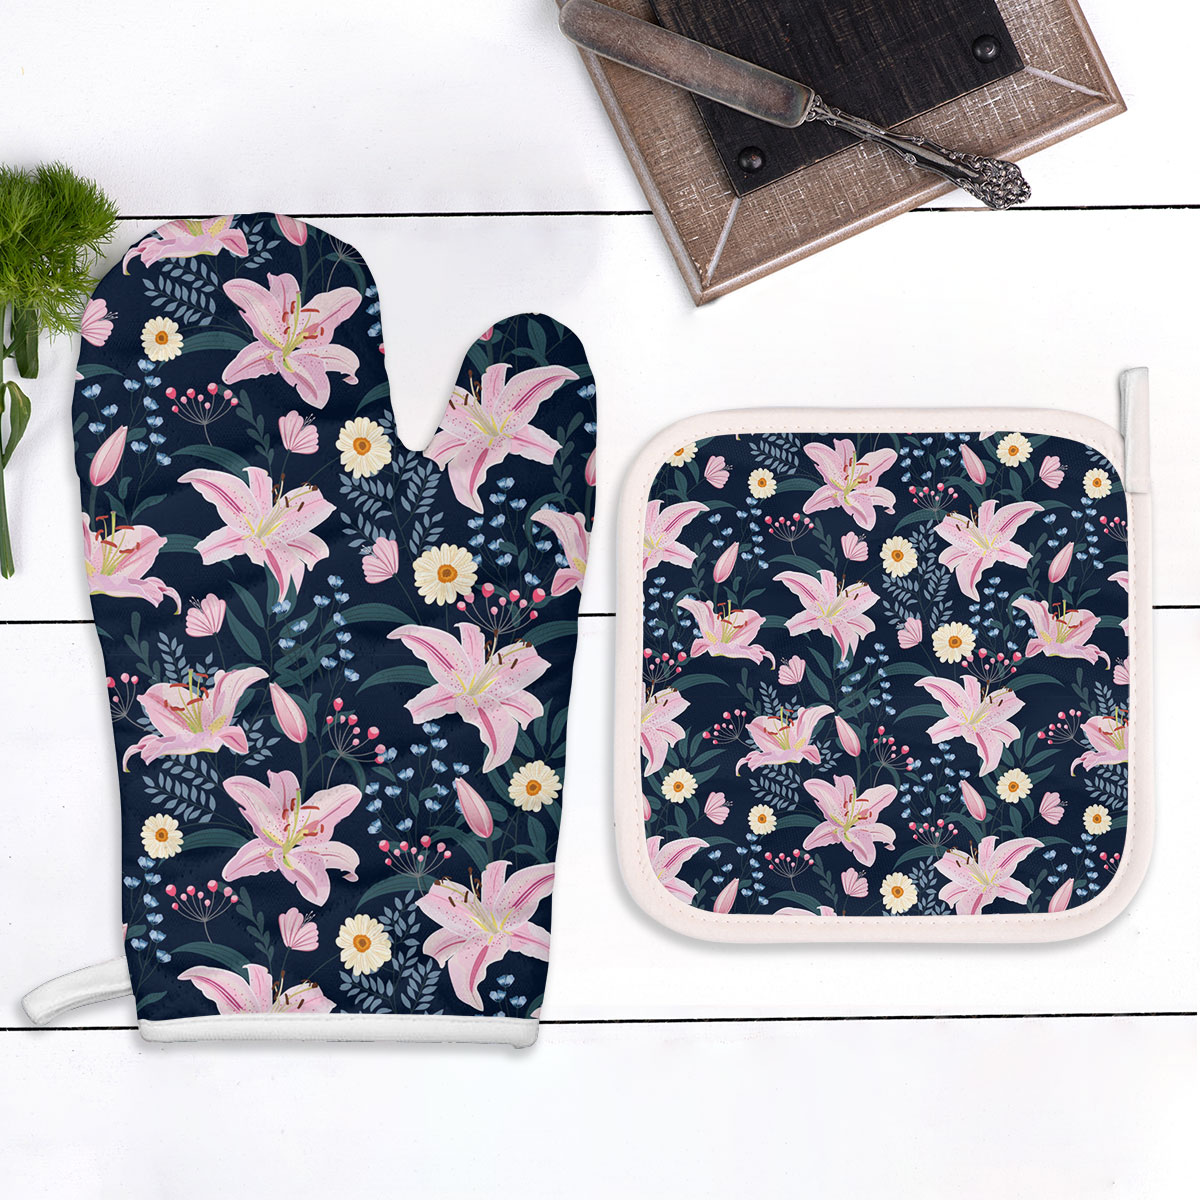 Lily Flower With Floral Pink Oven Mitts Pot Holder Set